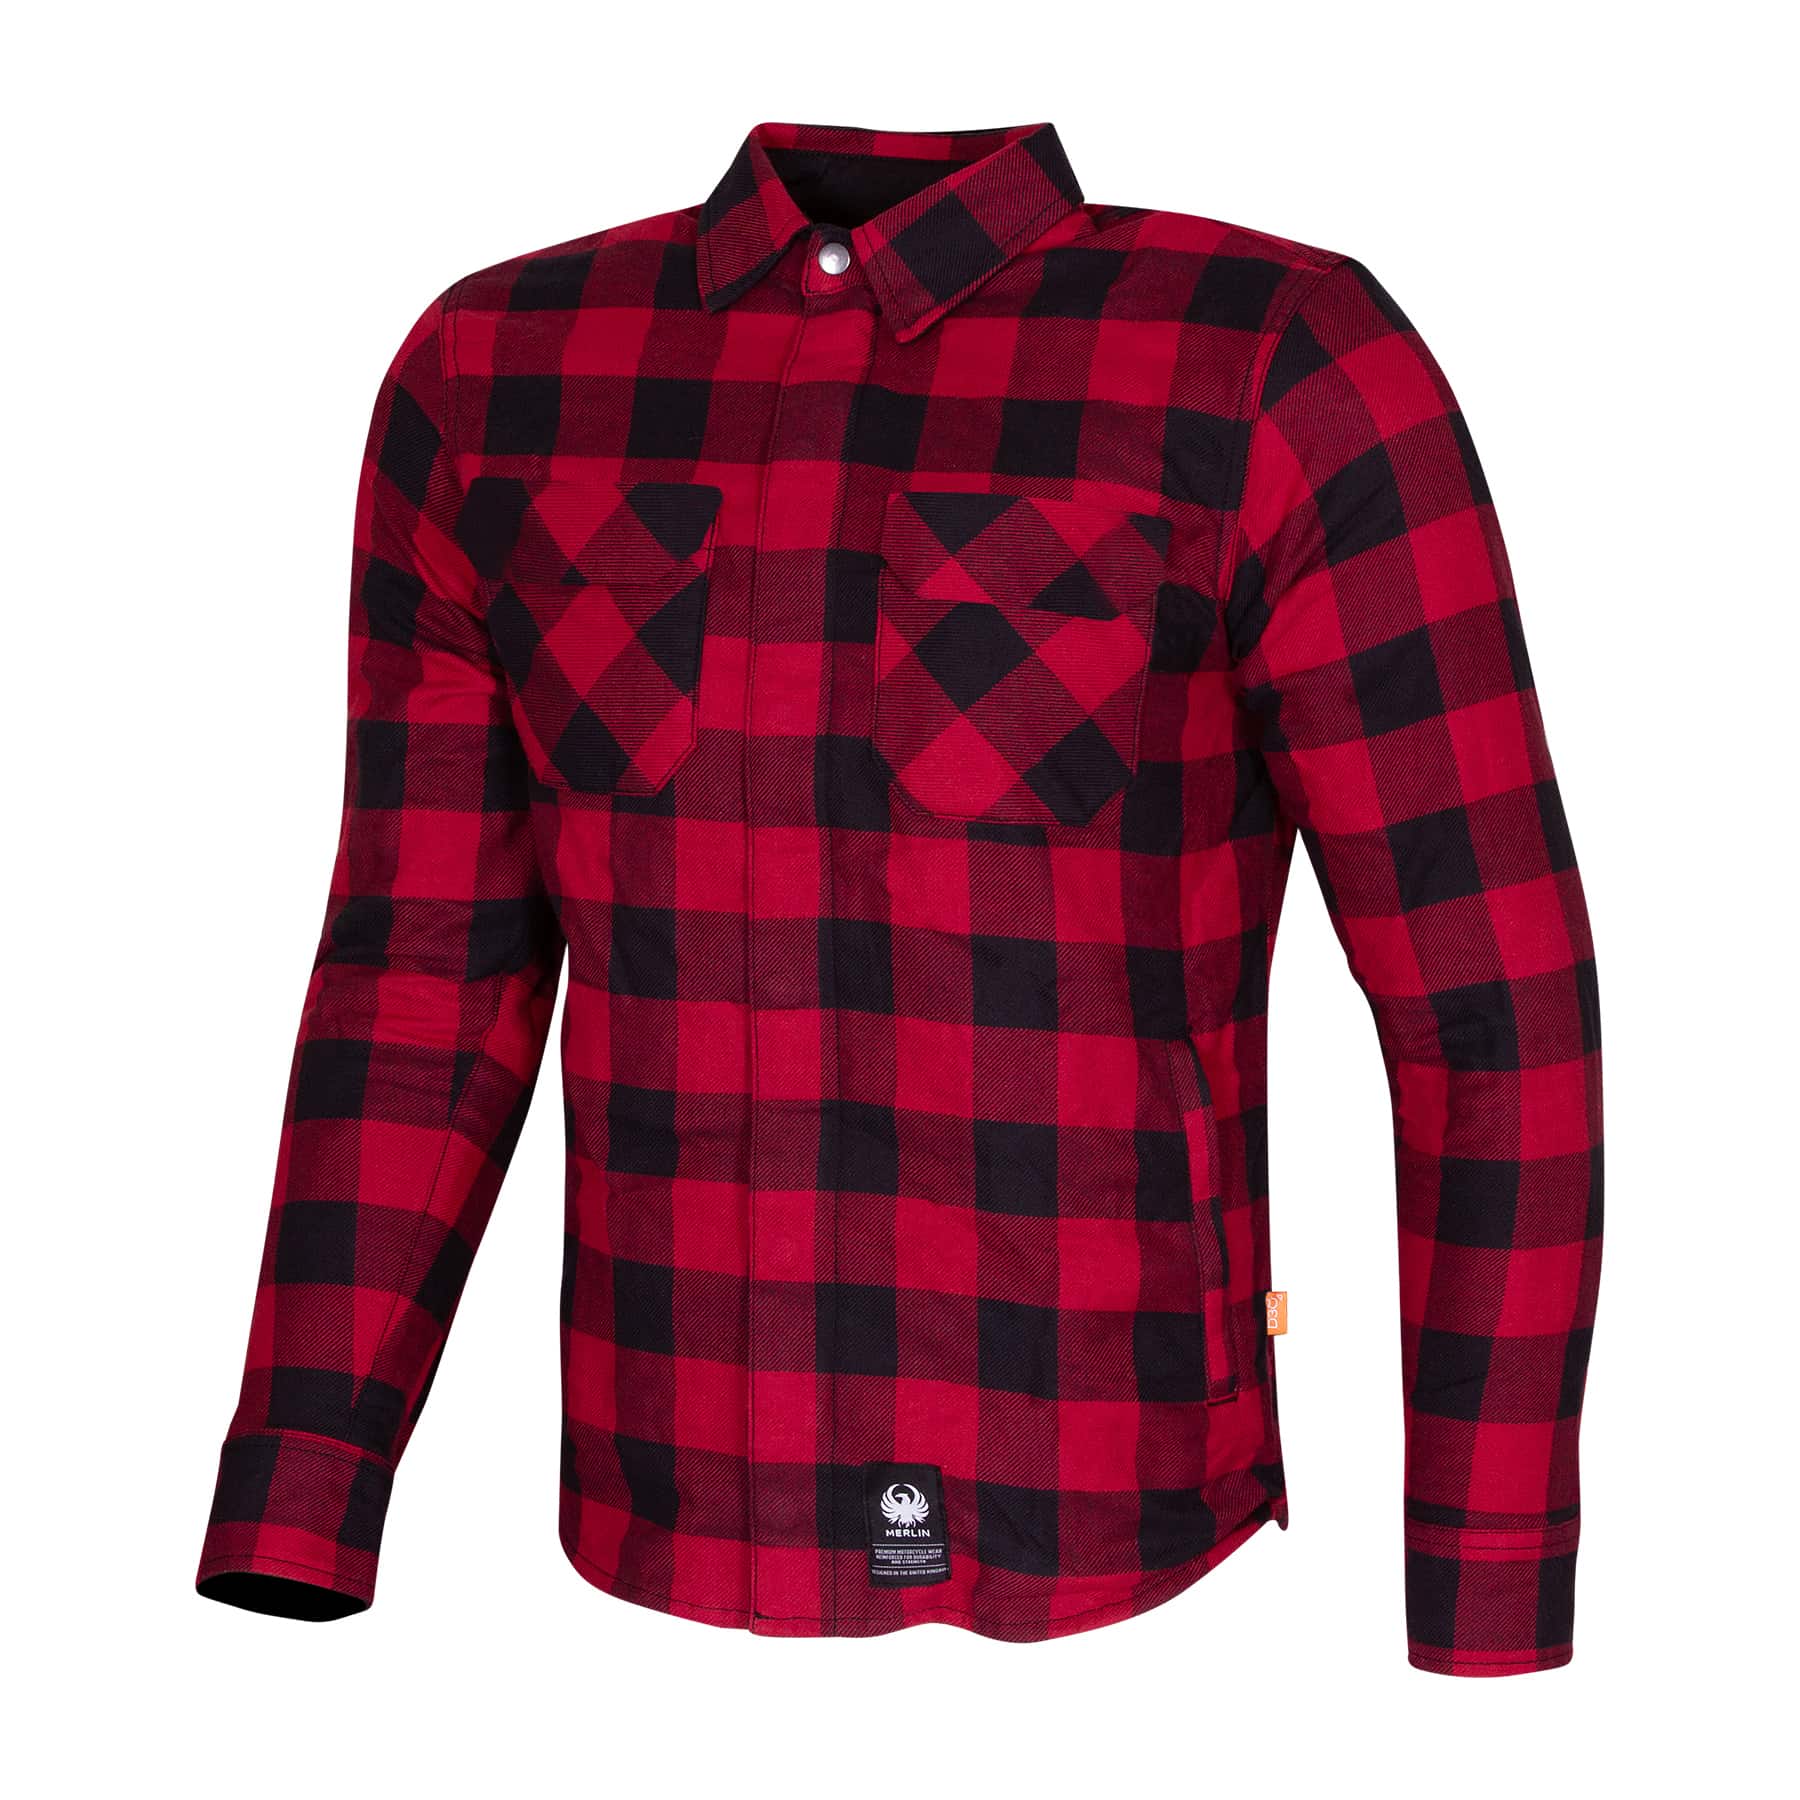 Merlin Sherbrook Riding Shirt in red and black checkered pattern